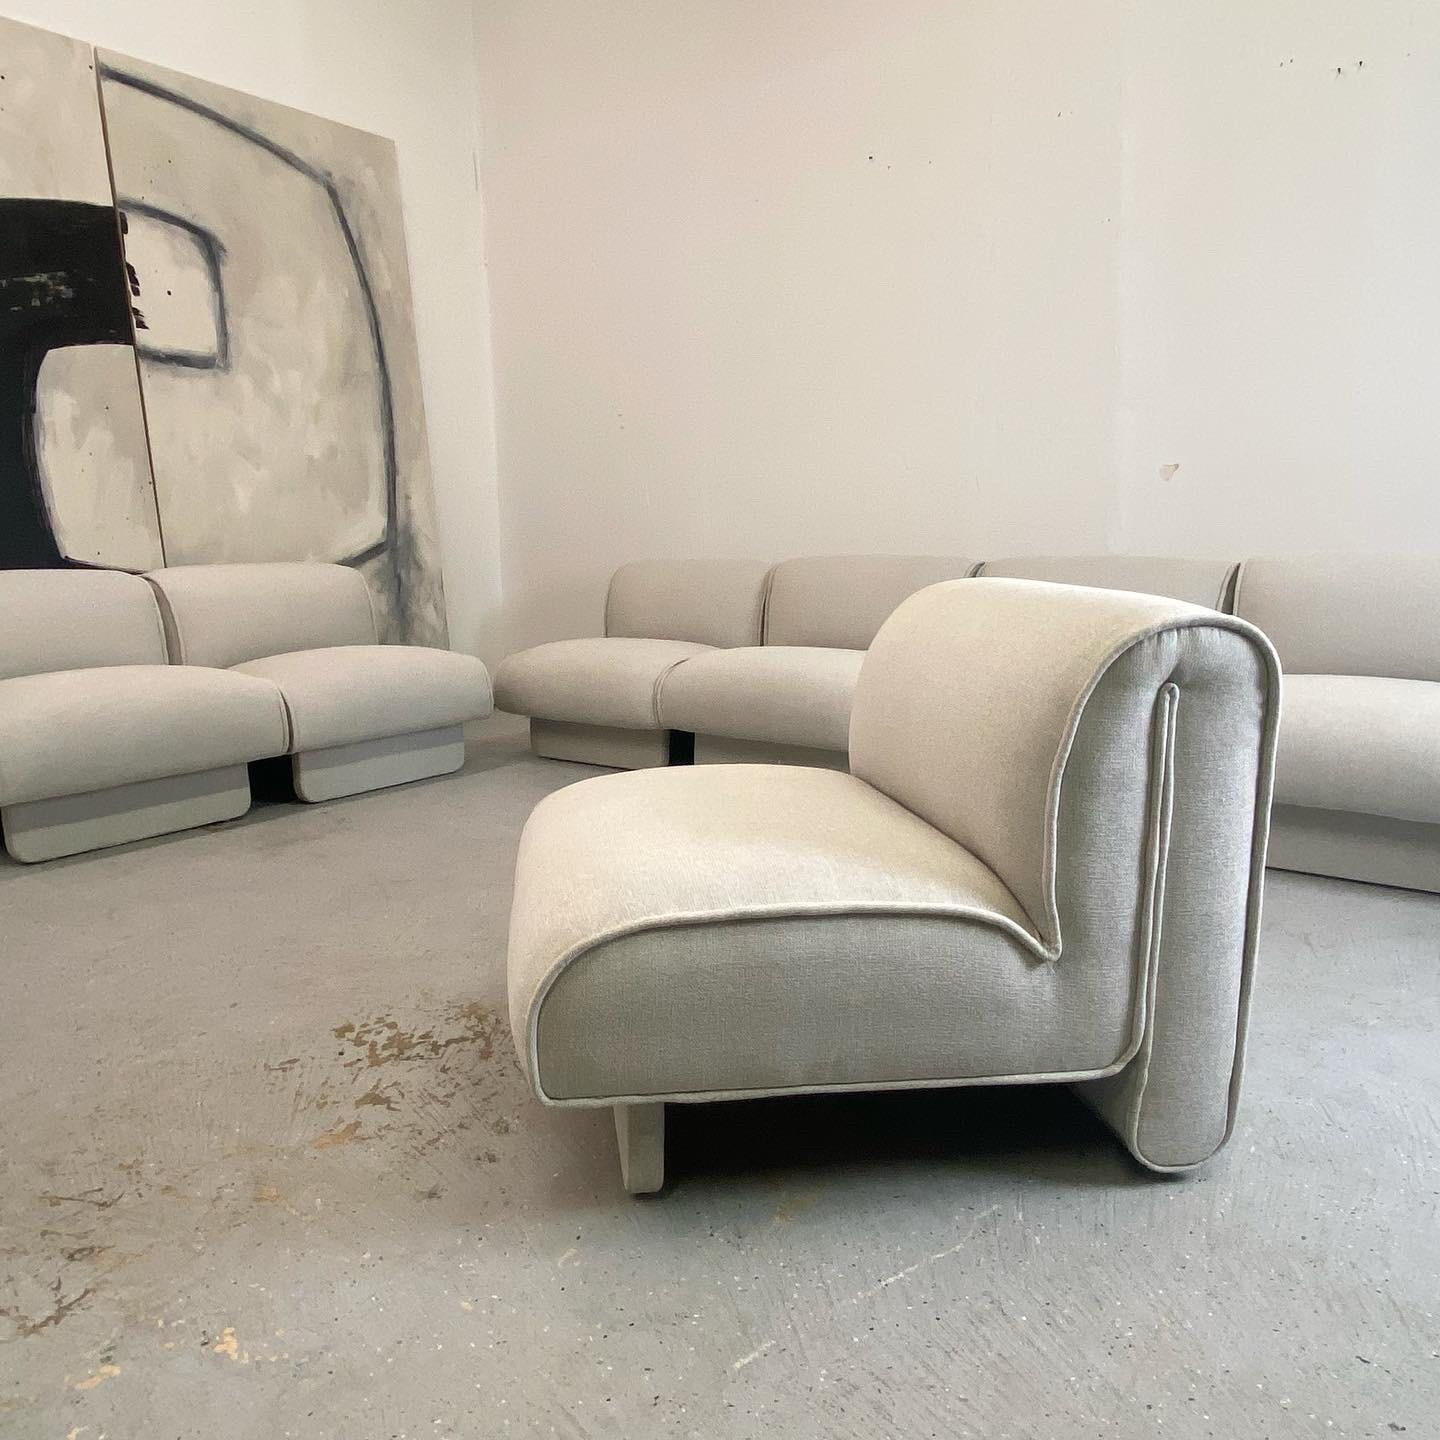 This is a vintage seating group fully restored in a sturdy woven fabric. These have a unique curved structure with a sculptural look that seem to float. Each element measures 31